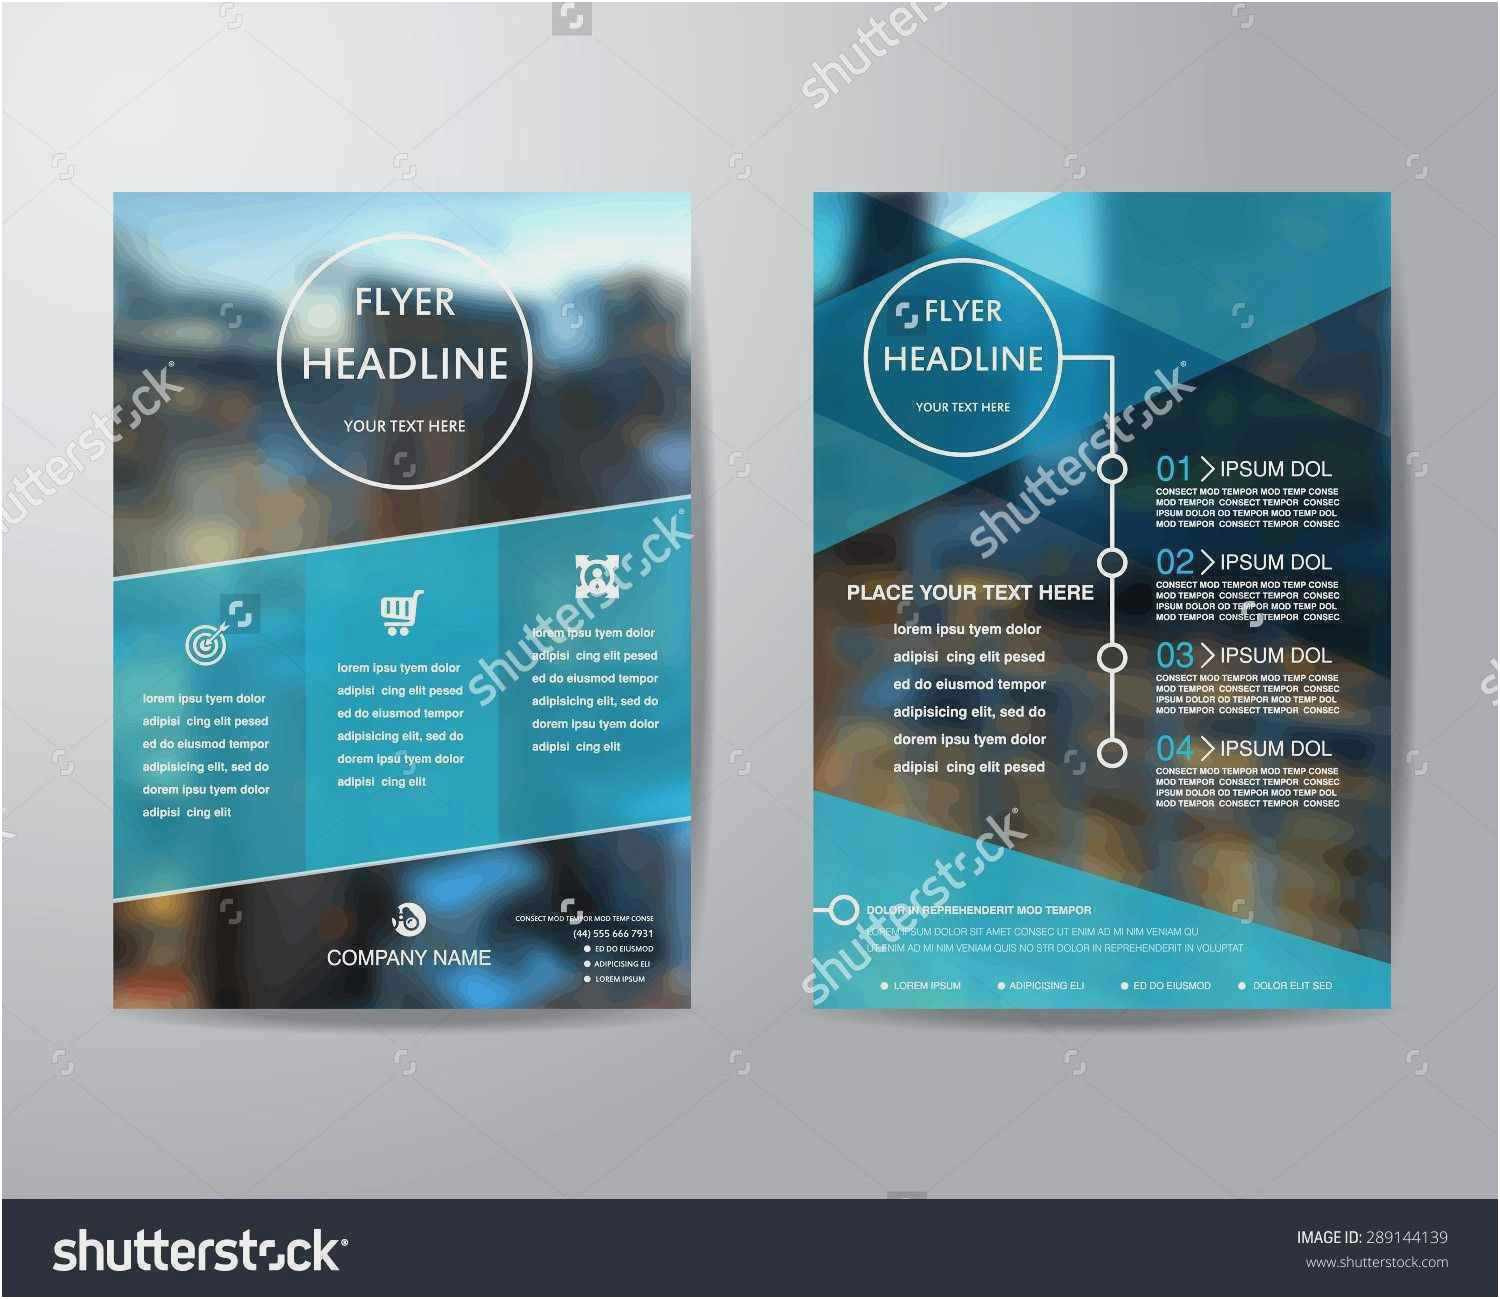 Free Download Luxury Advertising Flyer Template Poster Of Ibm Business Card Template